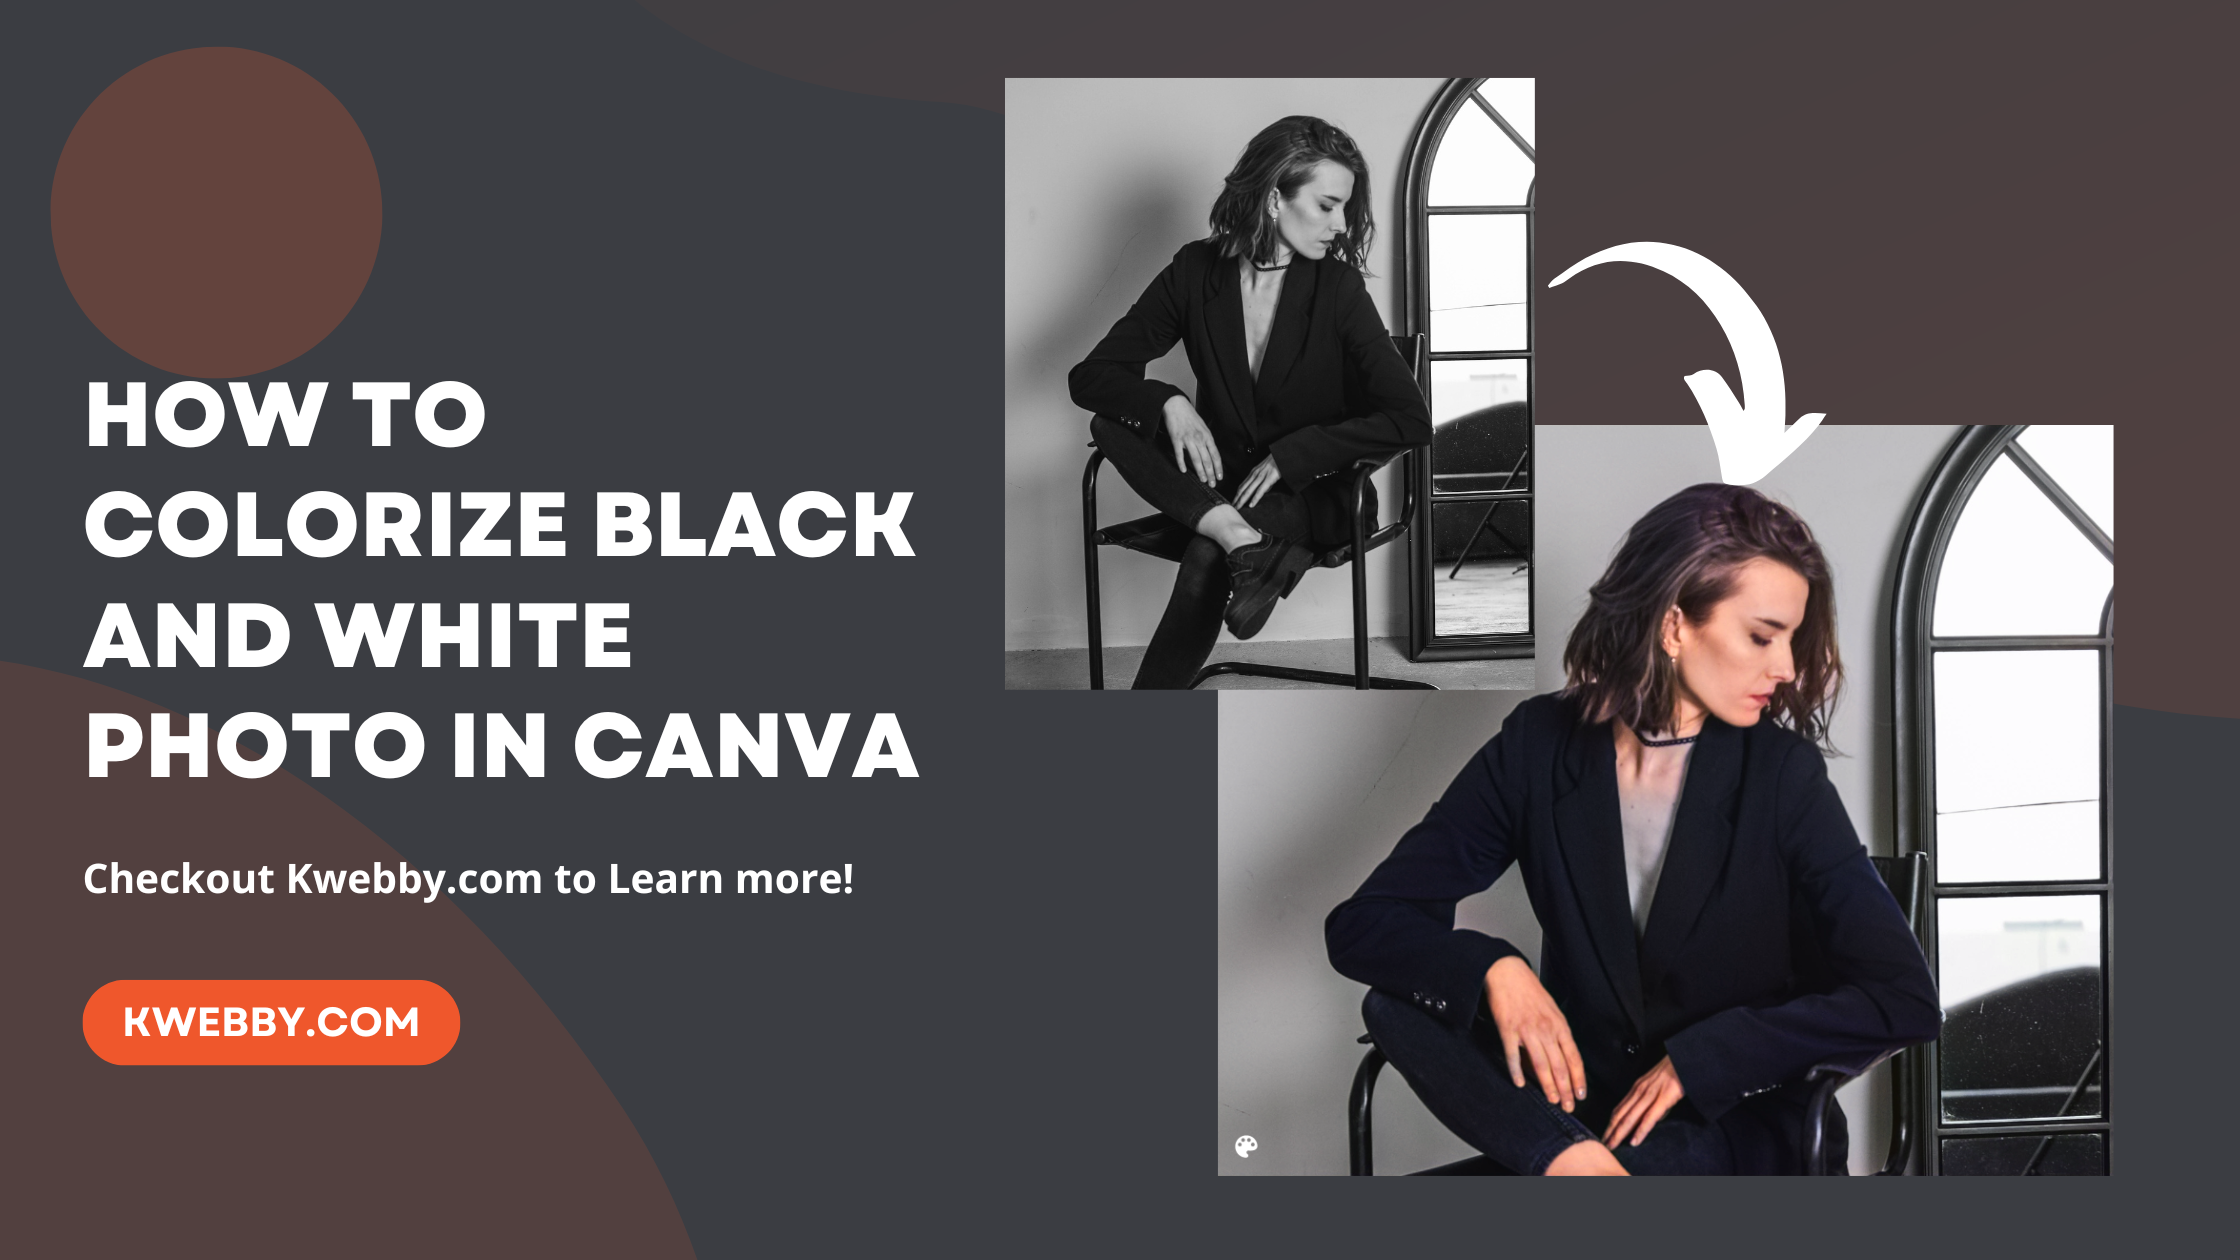 How to Colorize black and white photo in canva in 3 Clicks